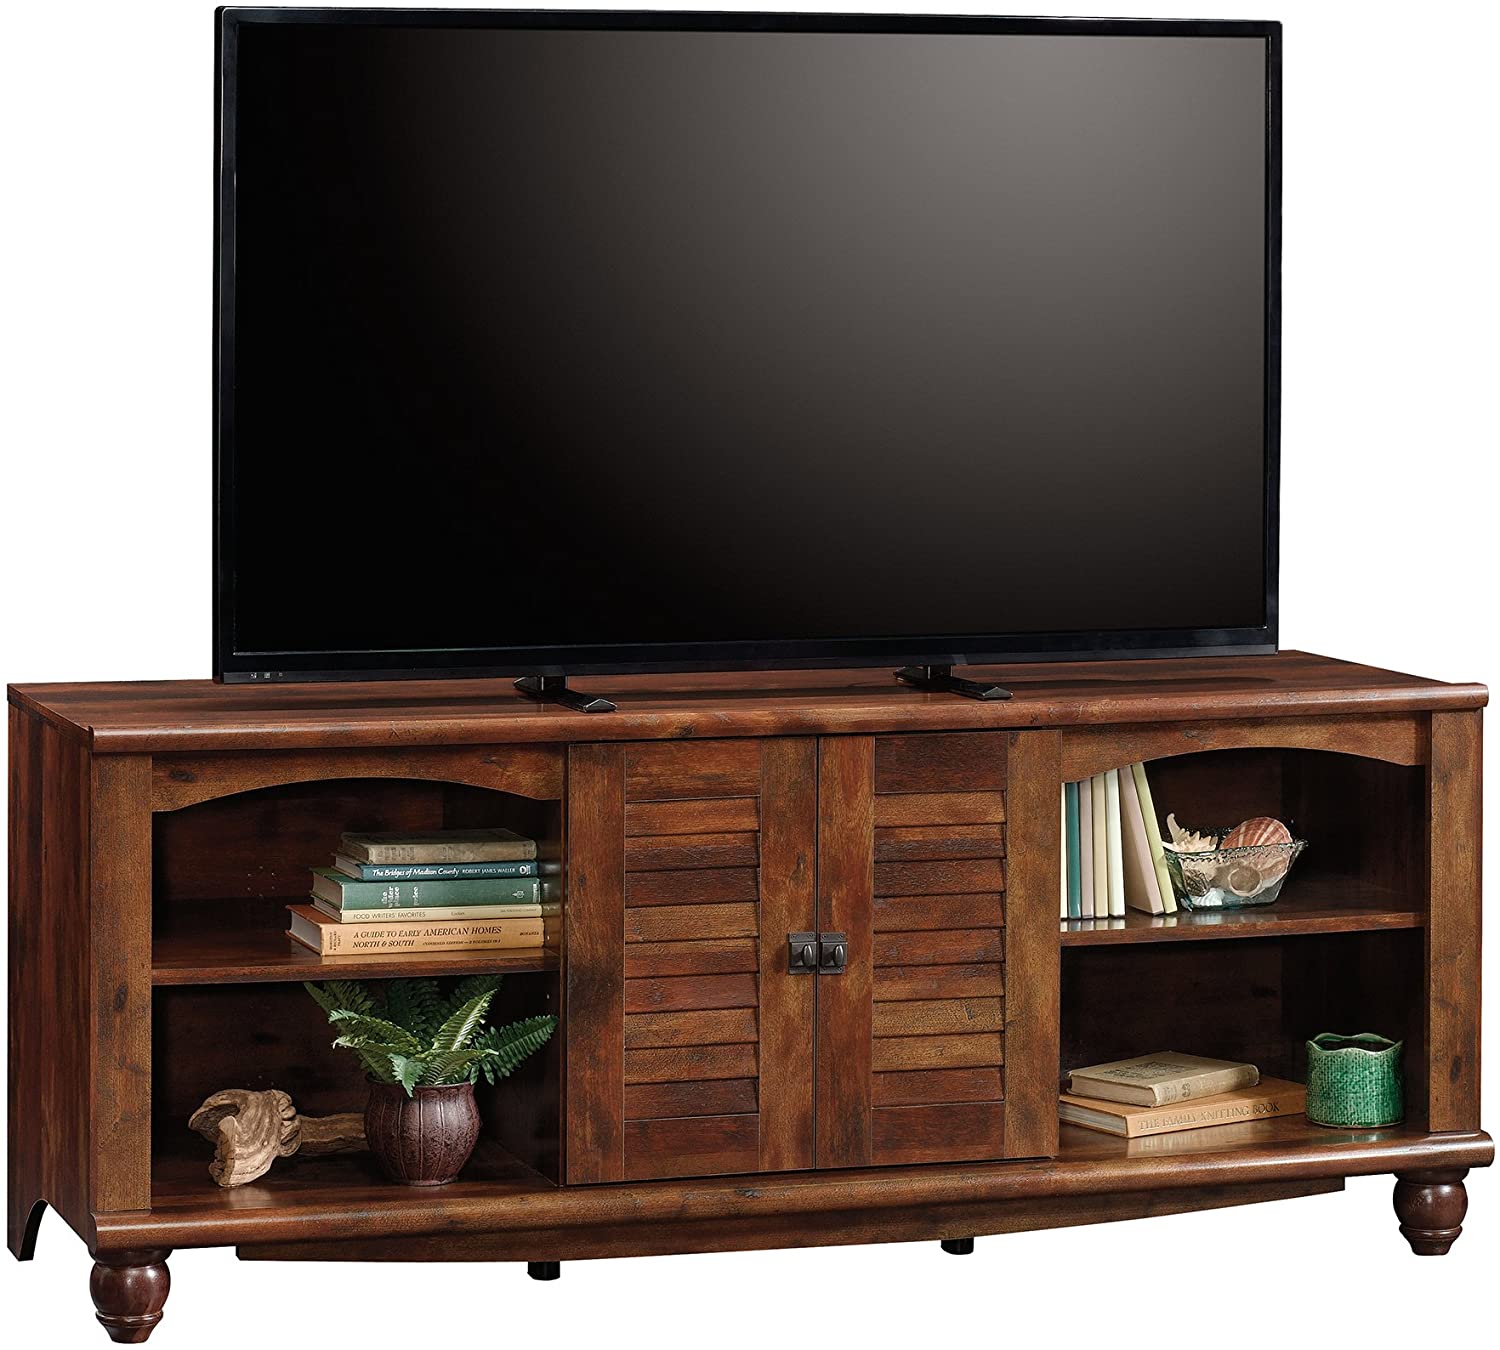 Sauder Harbor View Recycled Wood Entertainment Center, 60-Inch